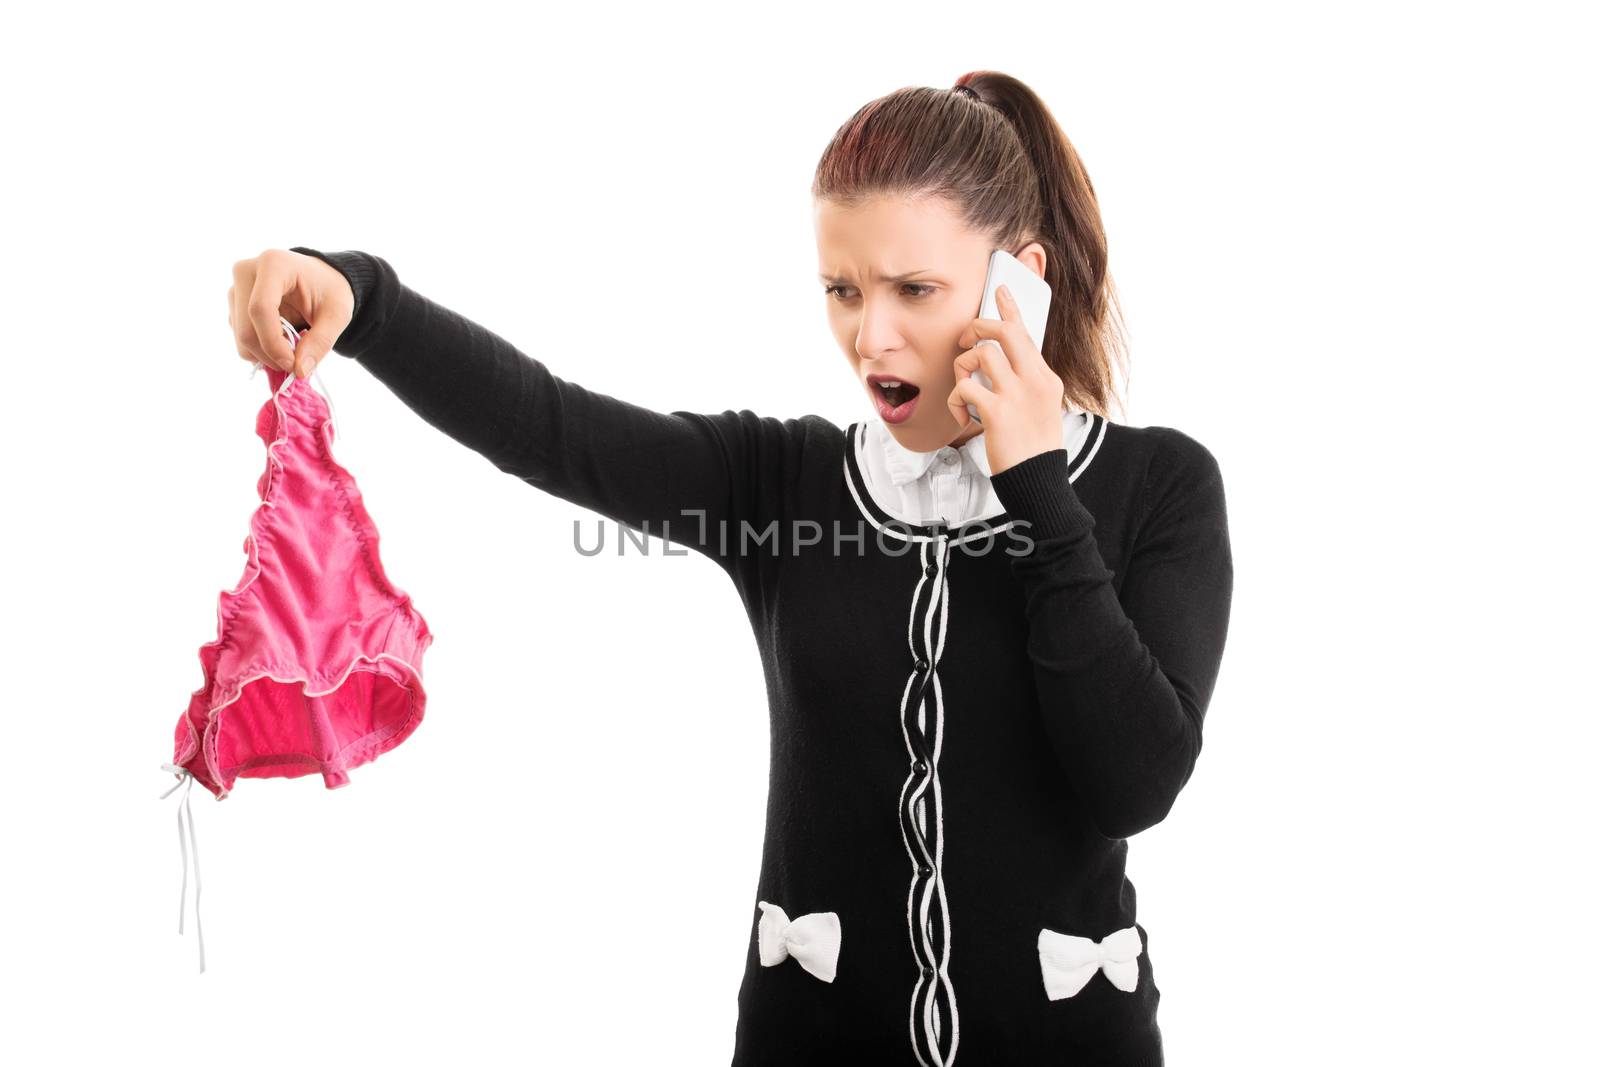 Cheating, adultery concept. Angry young woman holding someone else's panties while talking on the phone, looking disgusted, isolated on white background.